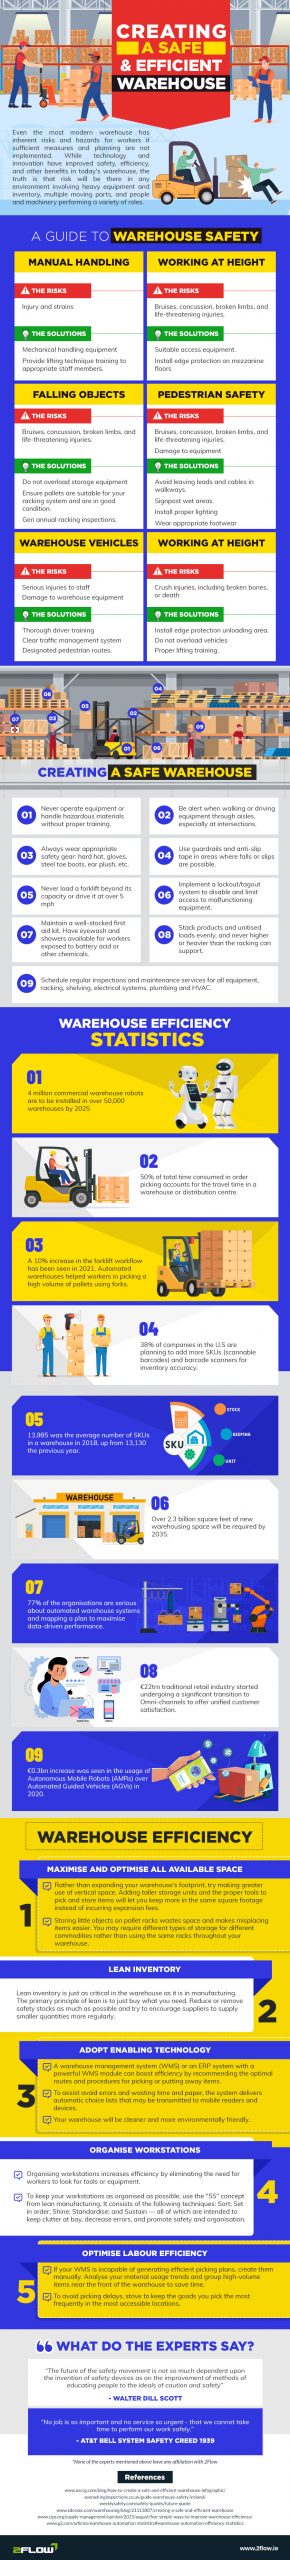 Creating a safe and efficient warehouse infographic